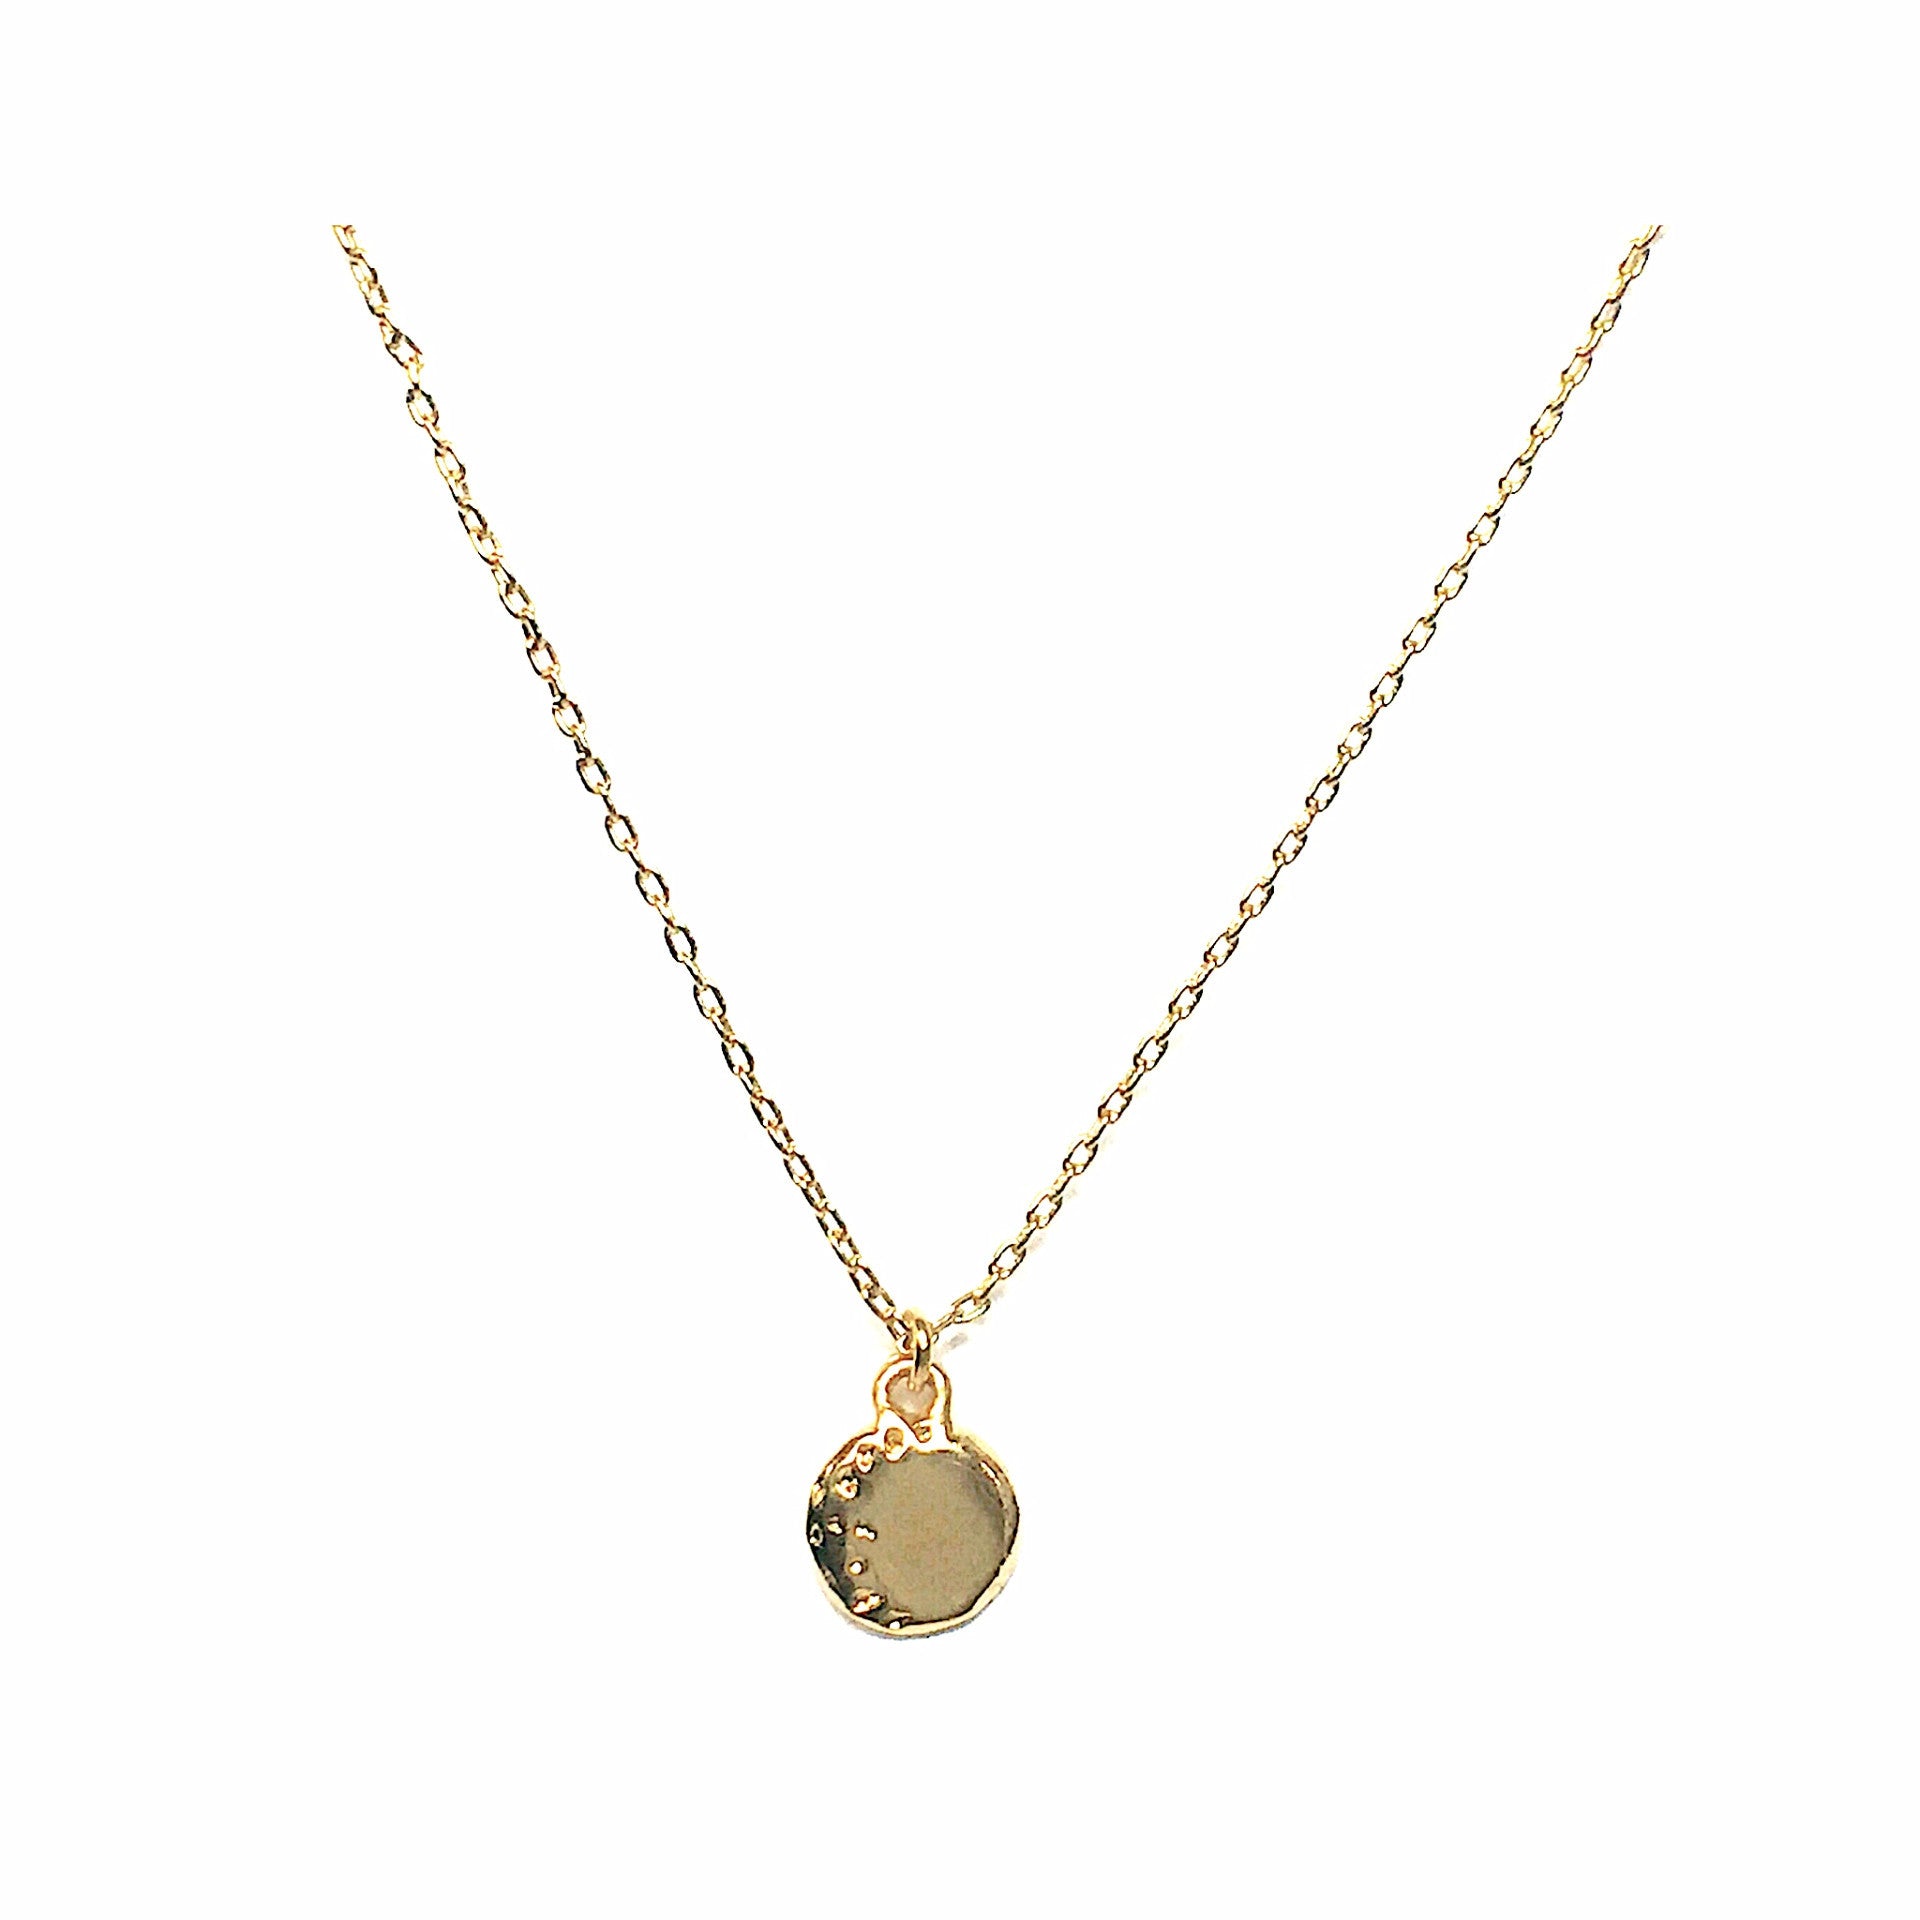 Necklaces For The Modern Woman | Kalaki Riot